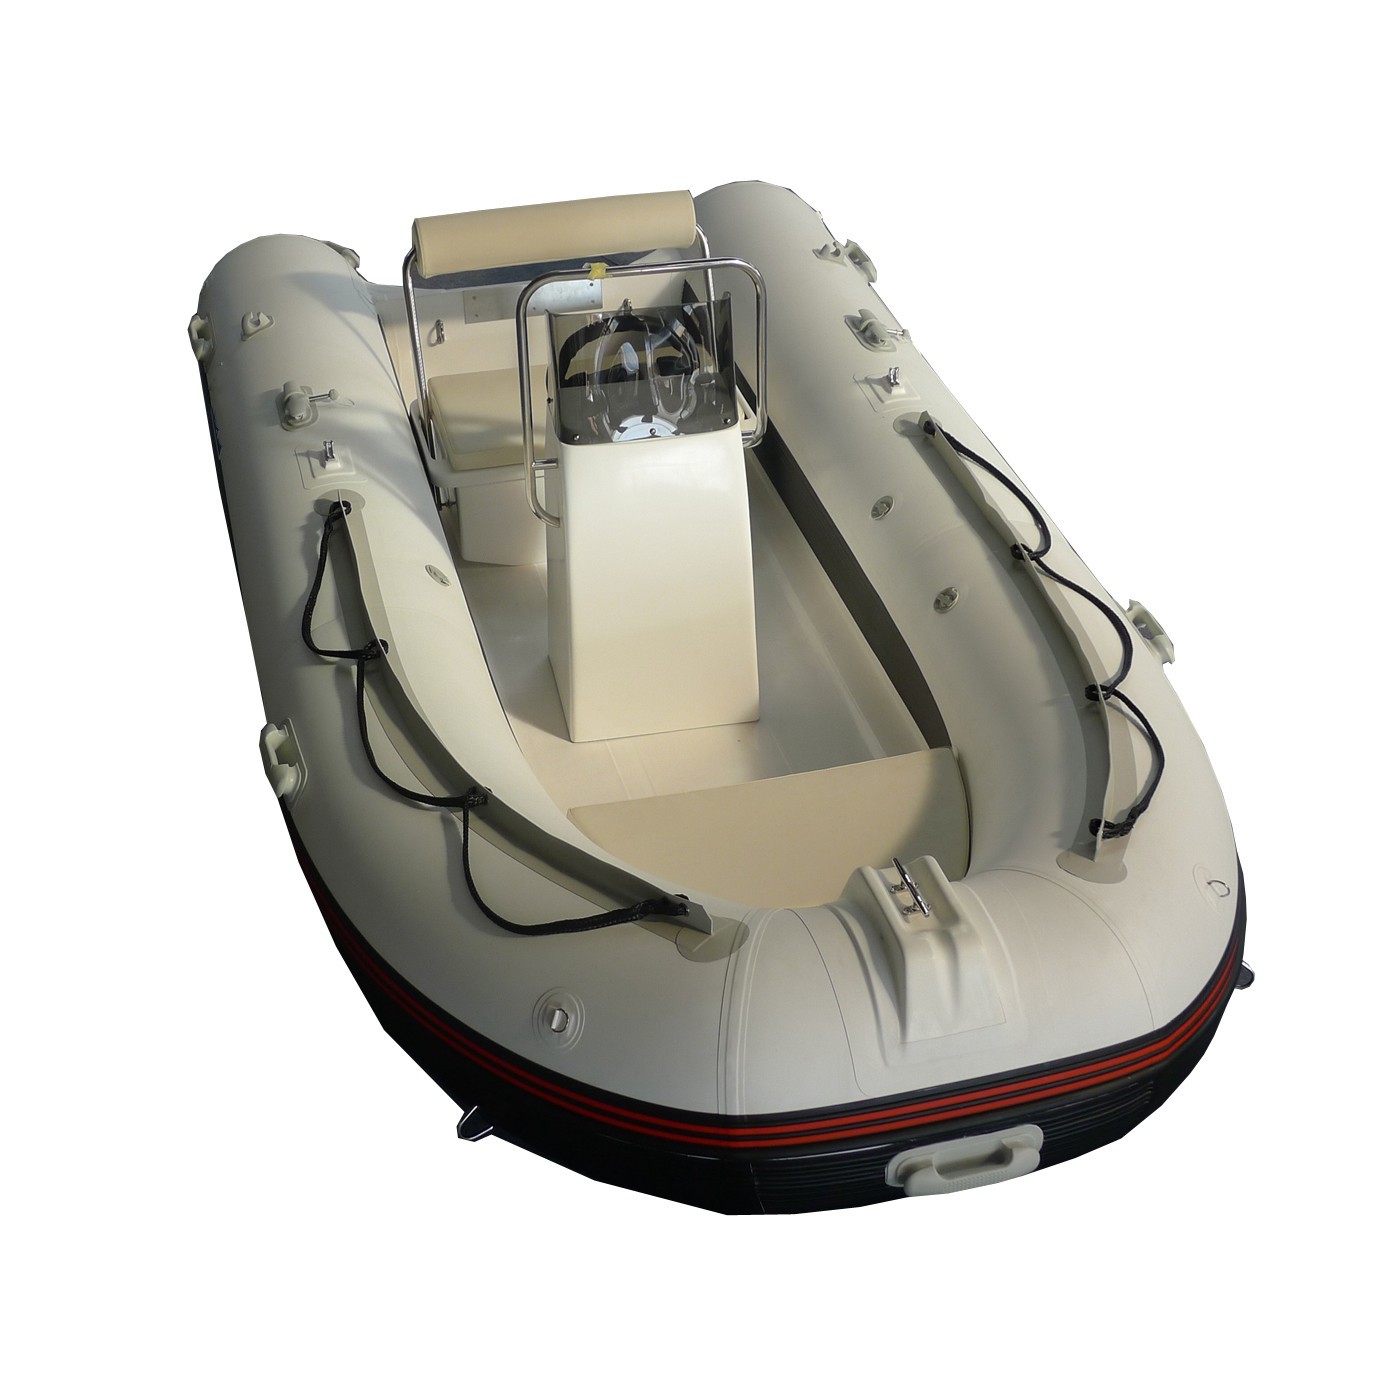 10 ft achilles inflatable boat